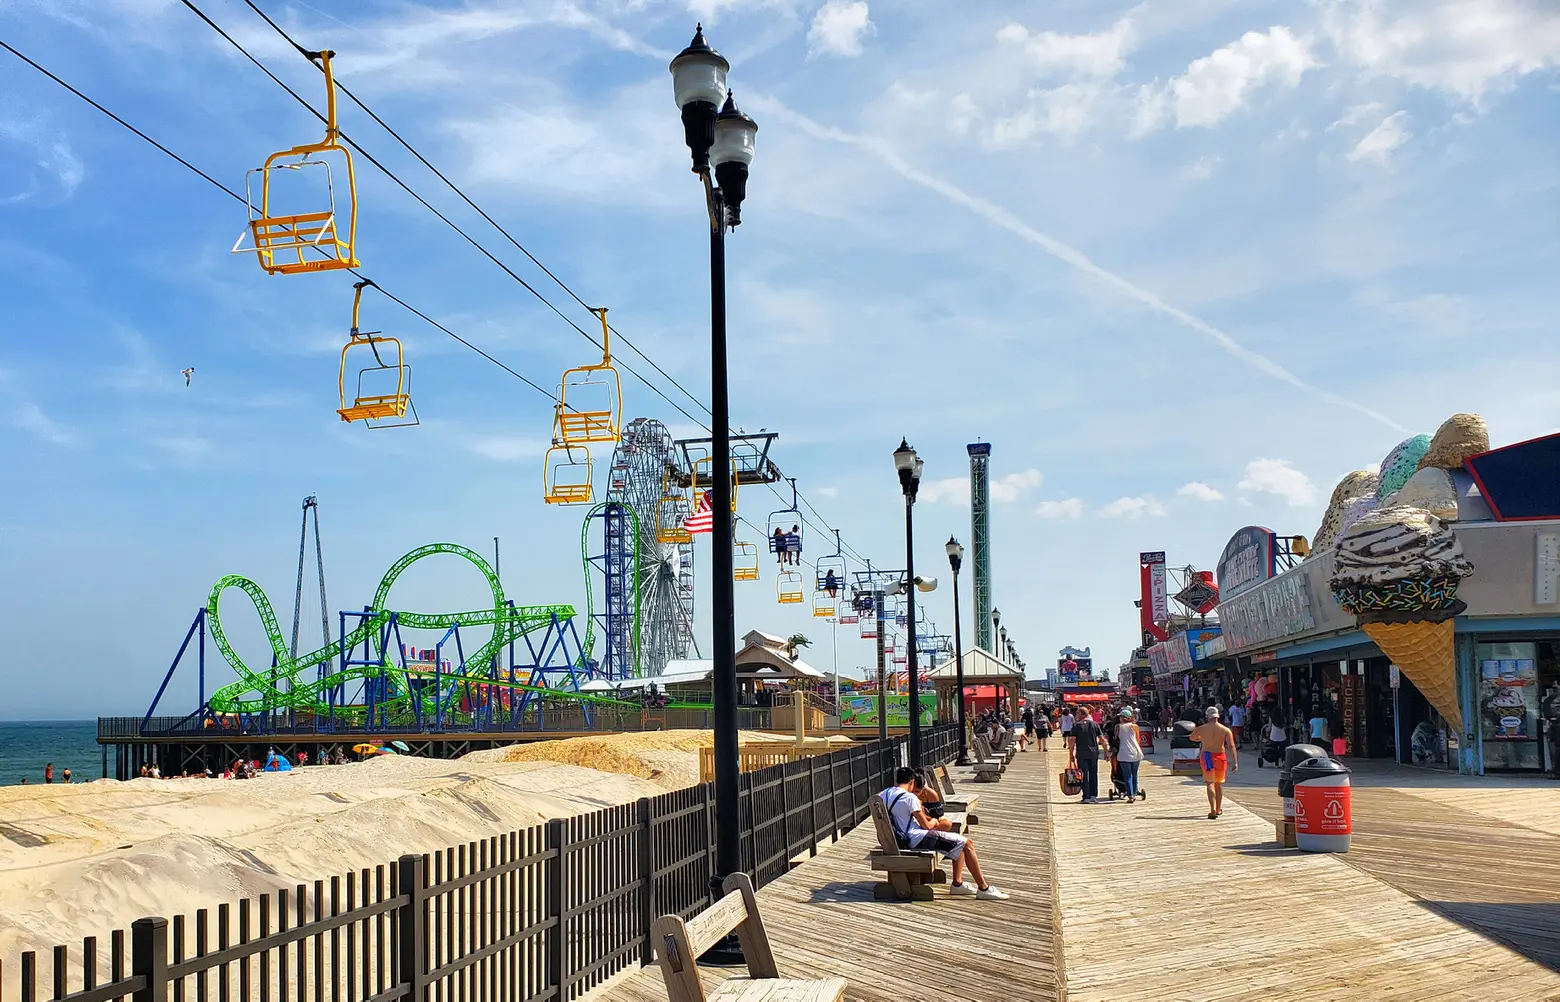 New Jersey will open indoor dining and outdoor amusement parks ahead of July 4th weekend